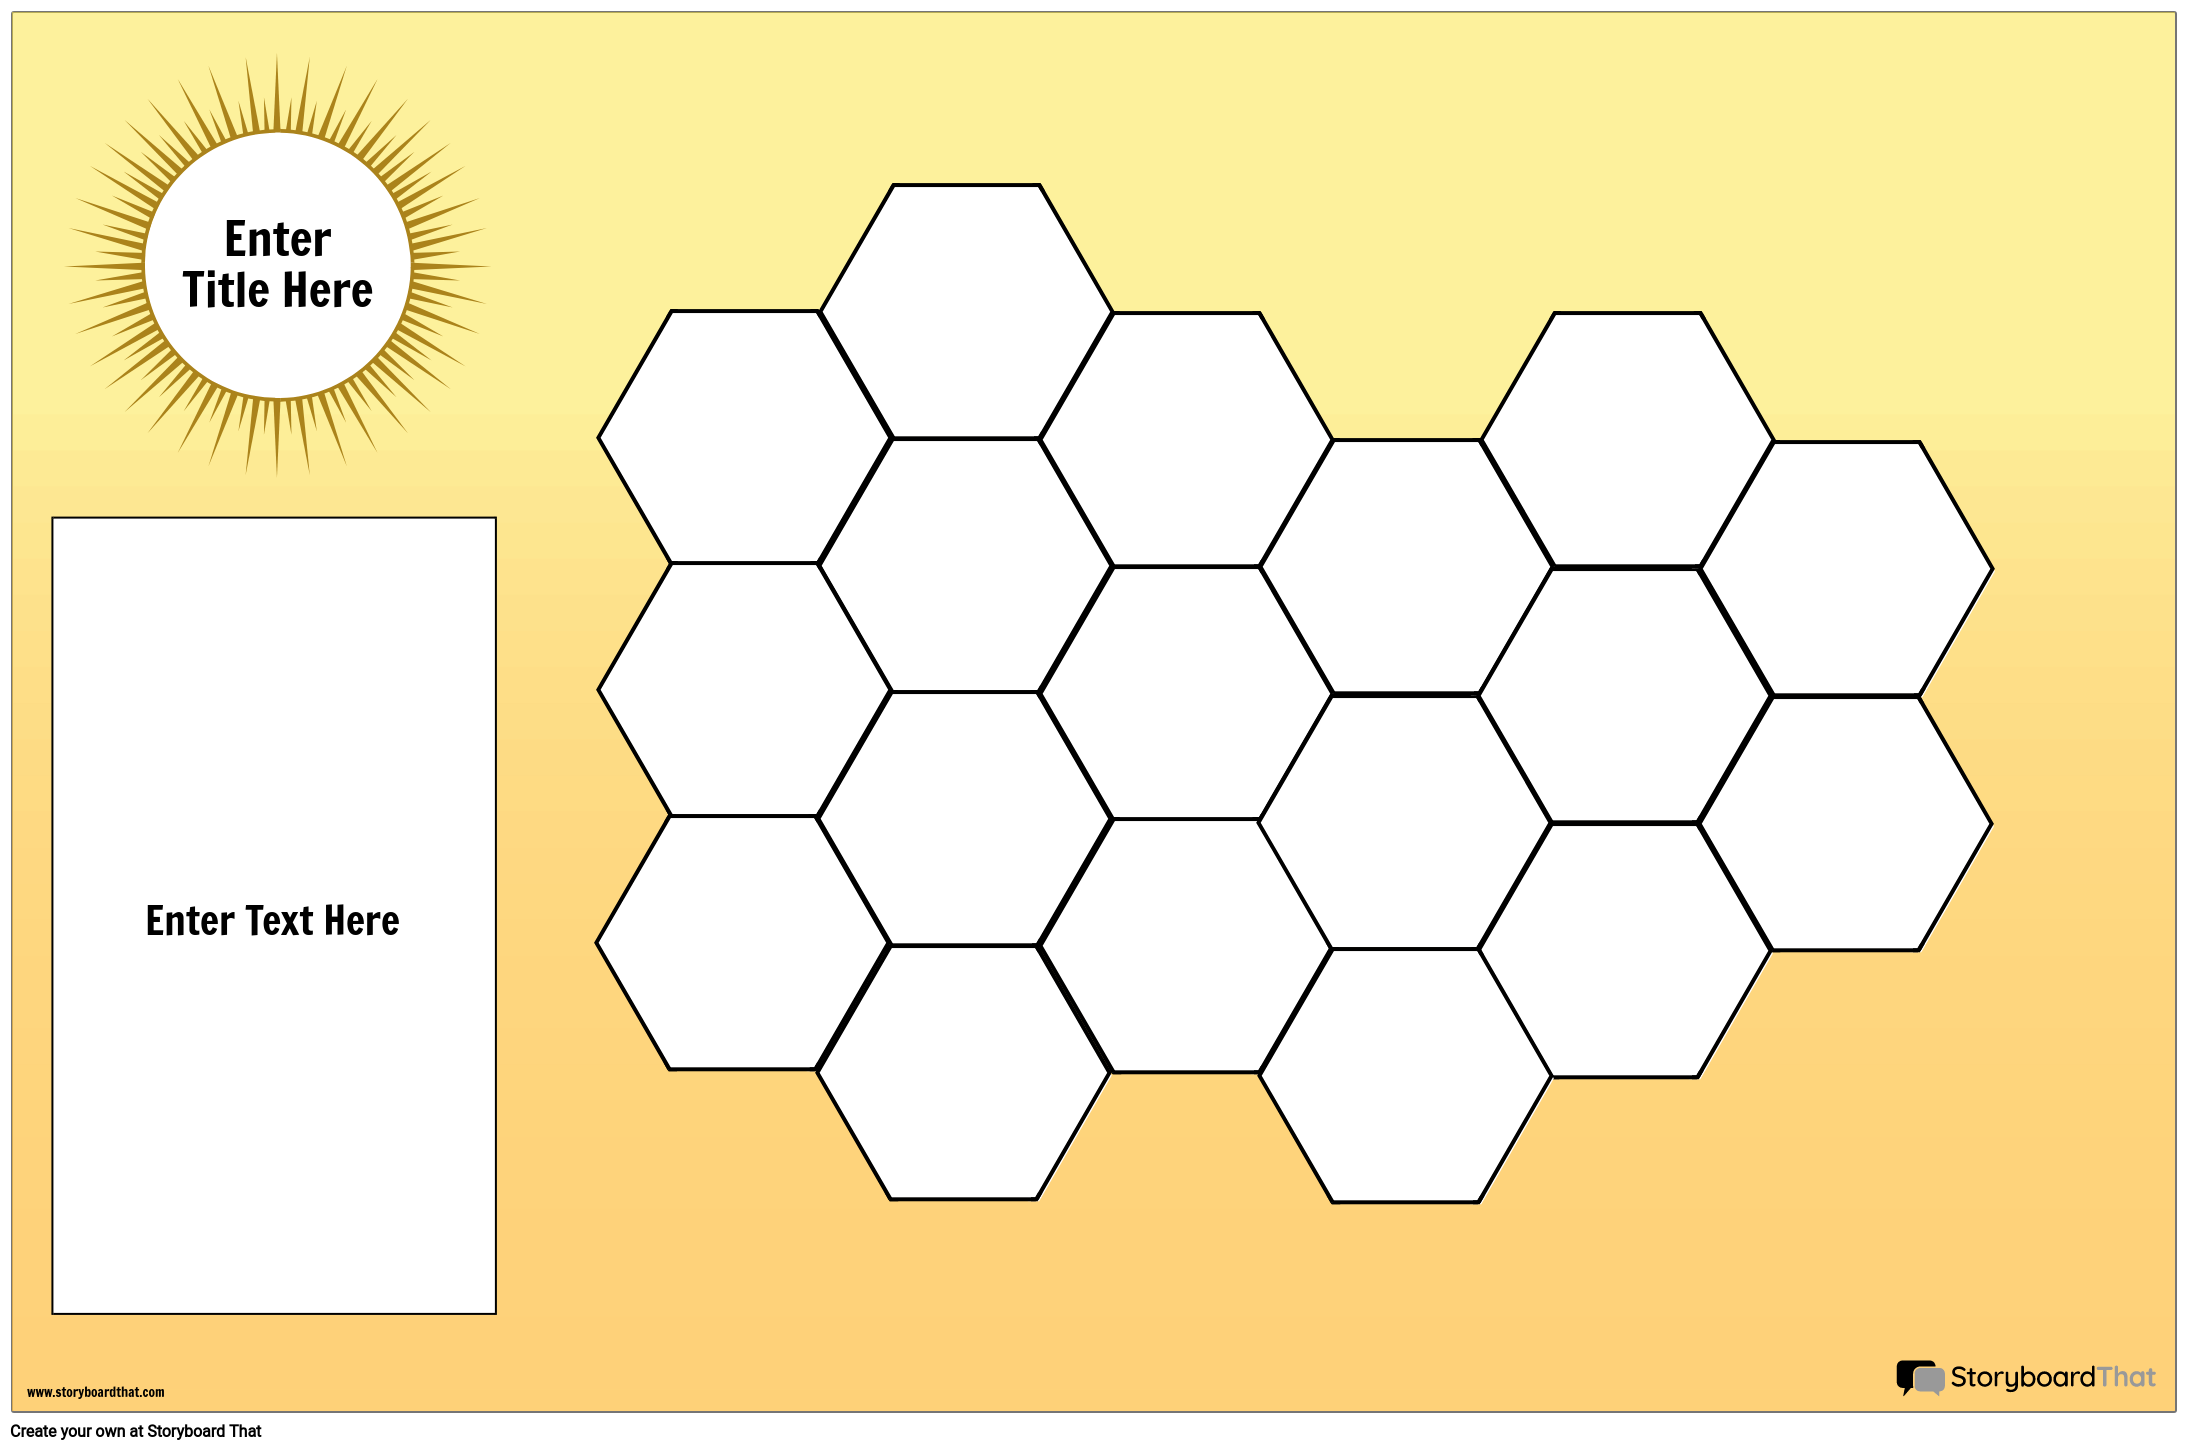 Board Game Template | Make Classroom Games